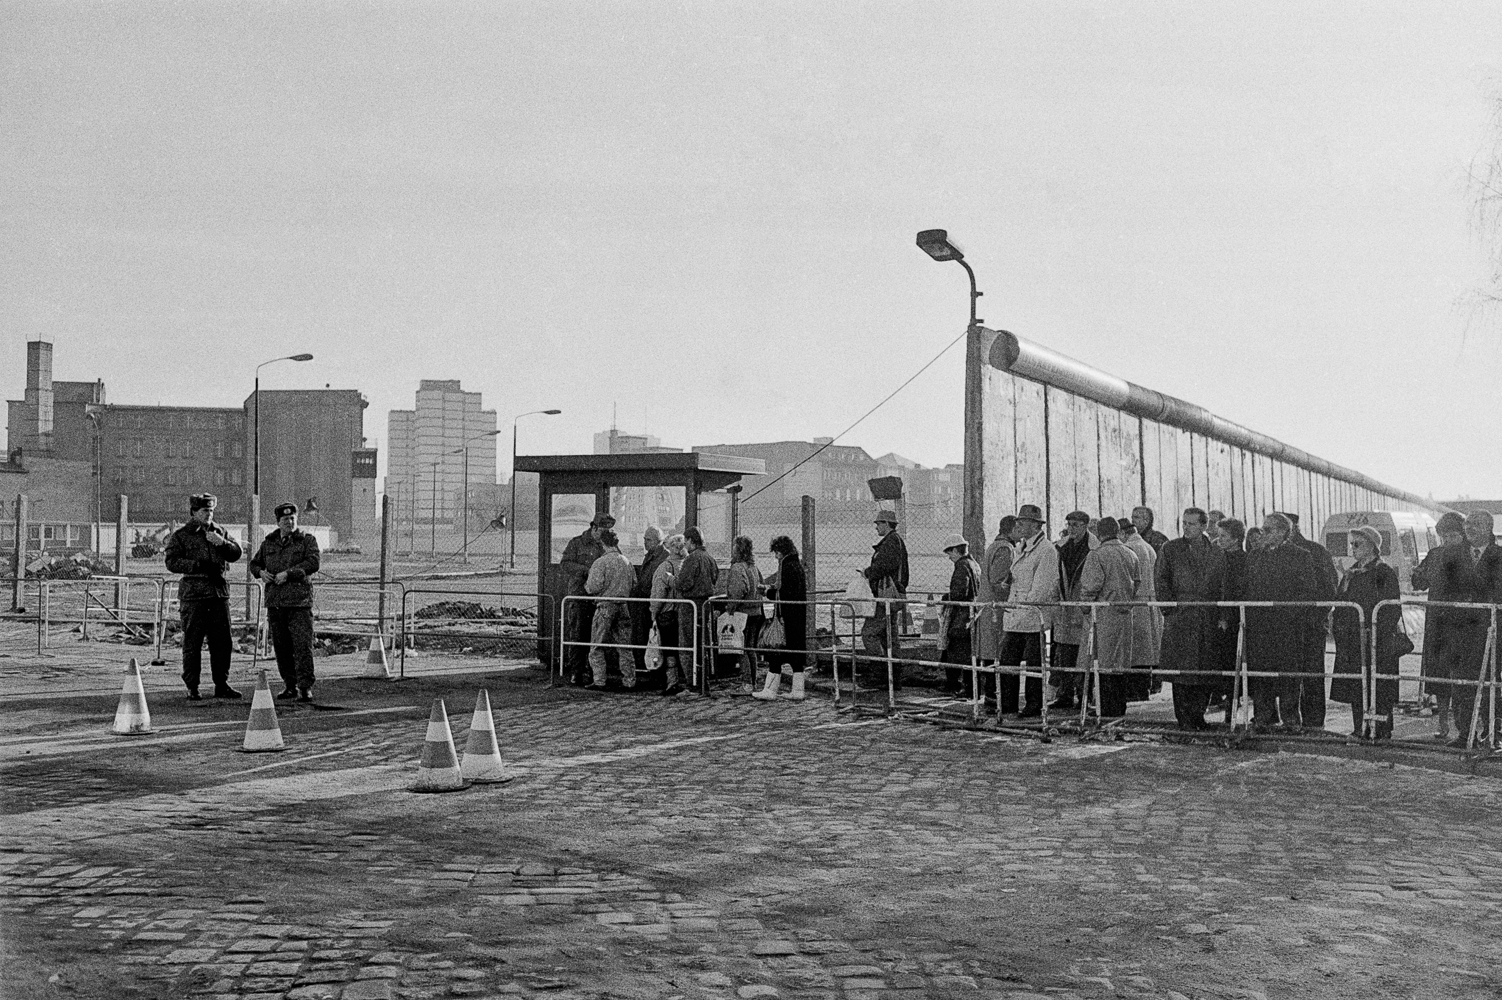 The Fall of the Berlin Wall. Esat Berliners queuing at an opening of the Berlin Wall in order to get back to East Berlin.